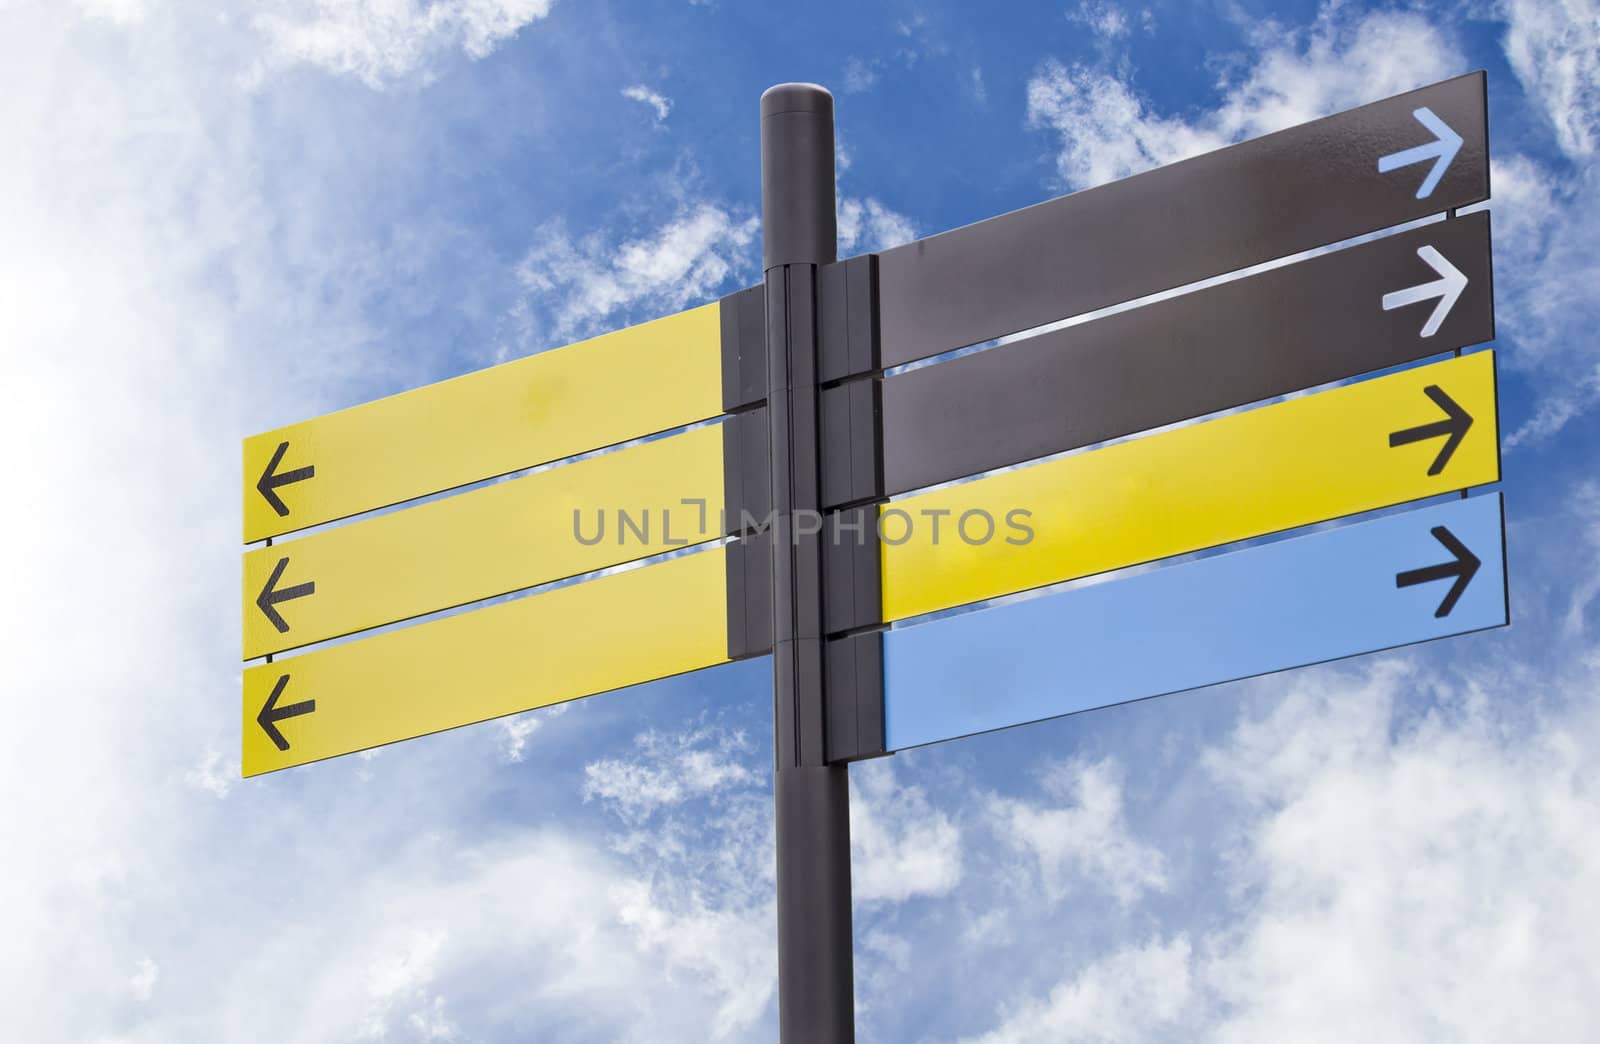 Colorful plastic informational signs with arrows. Show the direction. Against the blue sky with clouds